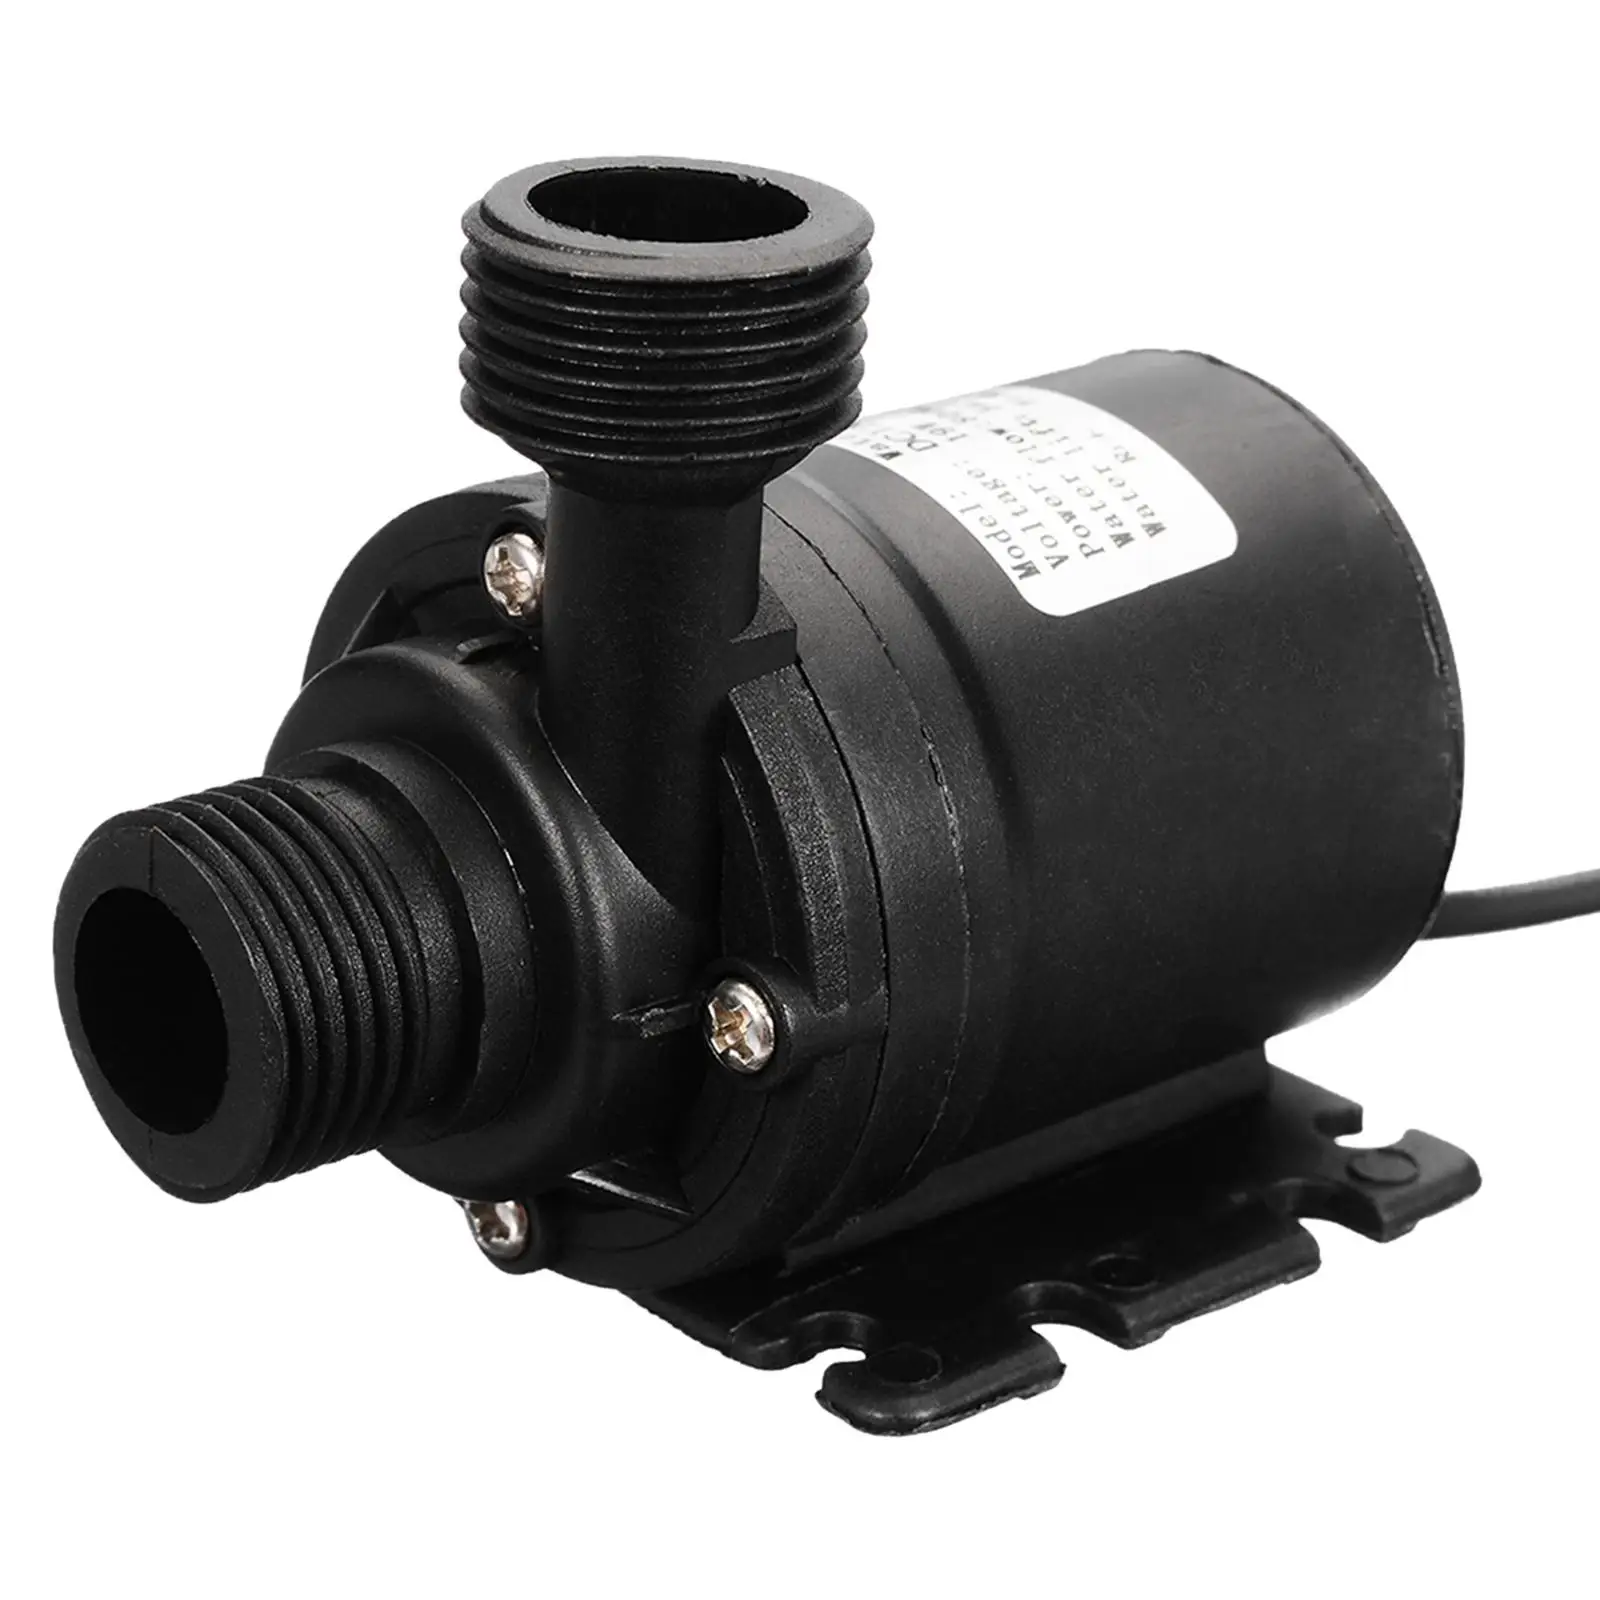 Brushless Submersible Water Pump Mini Quiet Centrifugal Pump for Aquarium Water Circulation System Pond Tools